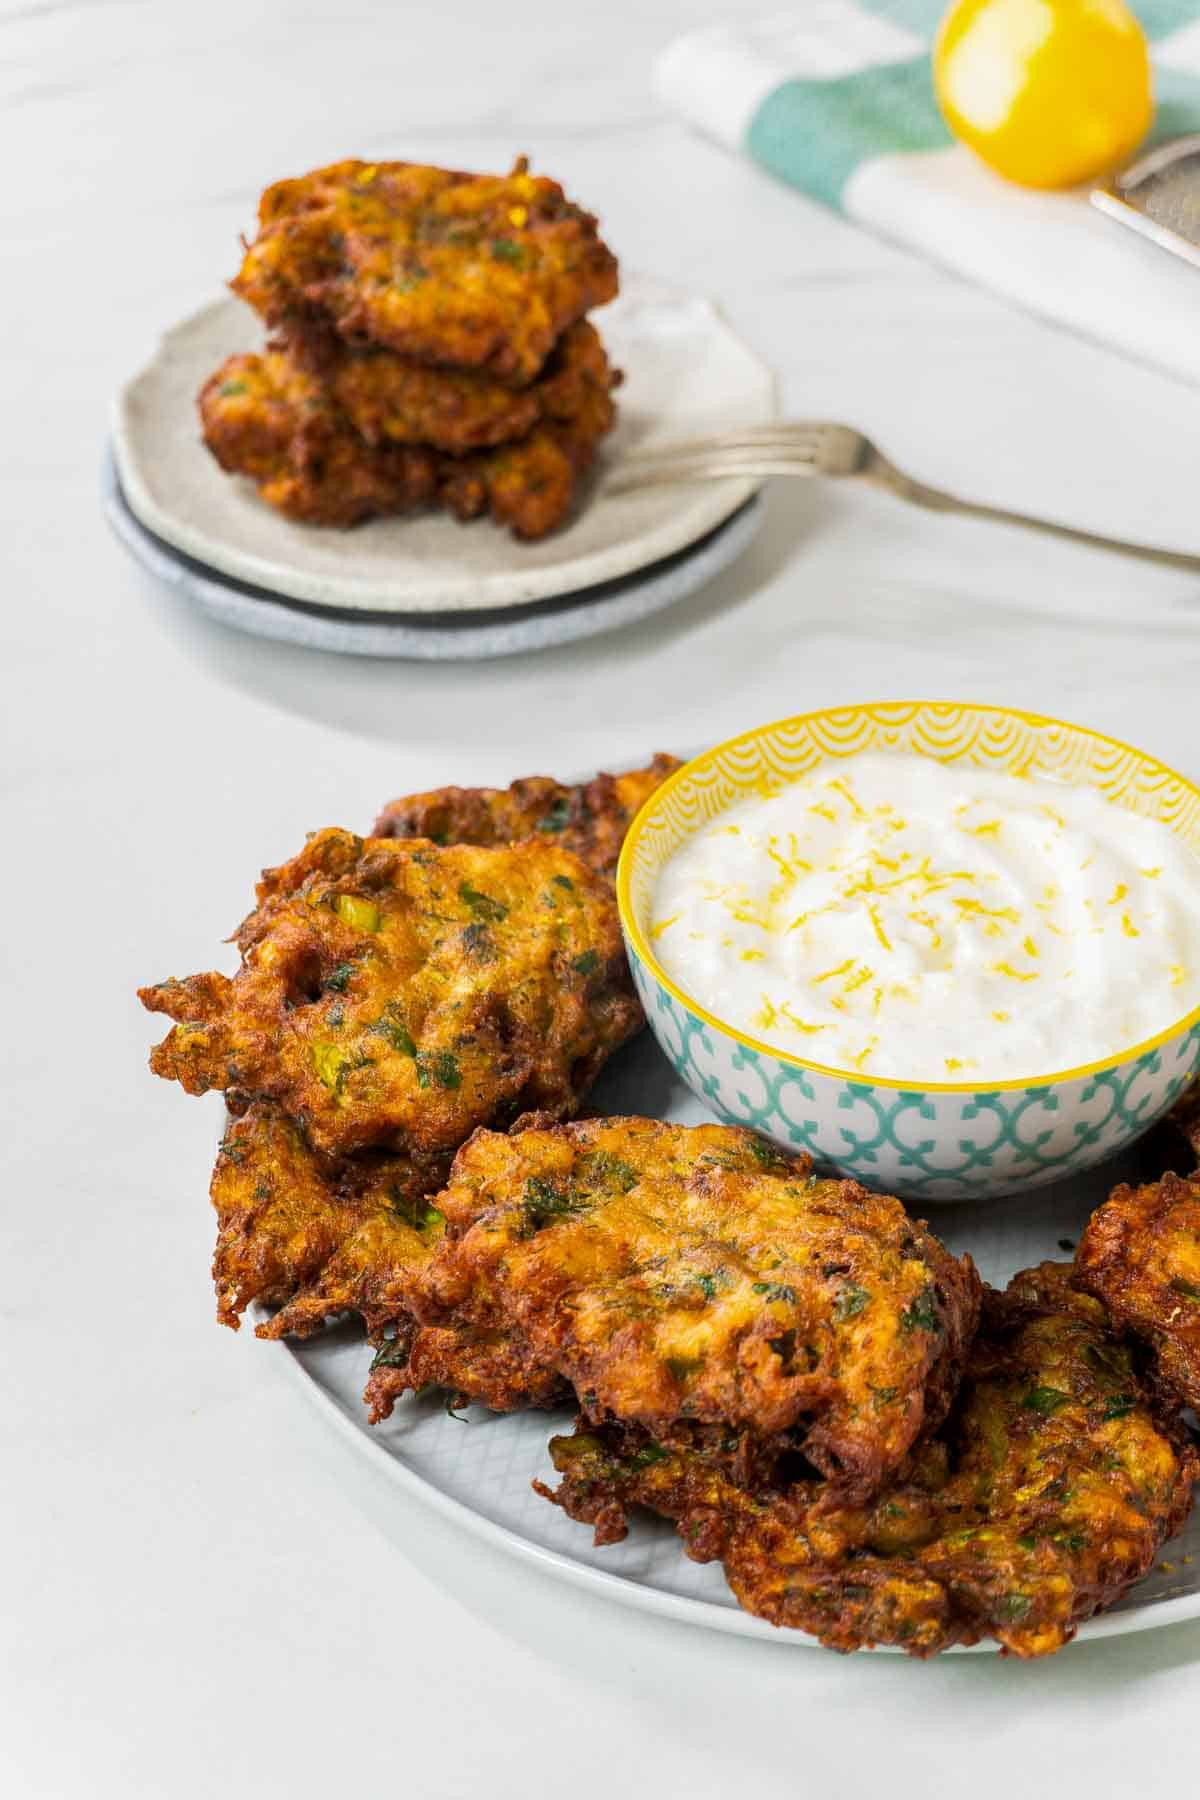 Mucver surrounding a bowl of yoghurt dip. More individual zucchini fritters are visible in the background.